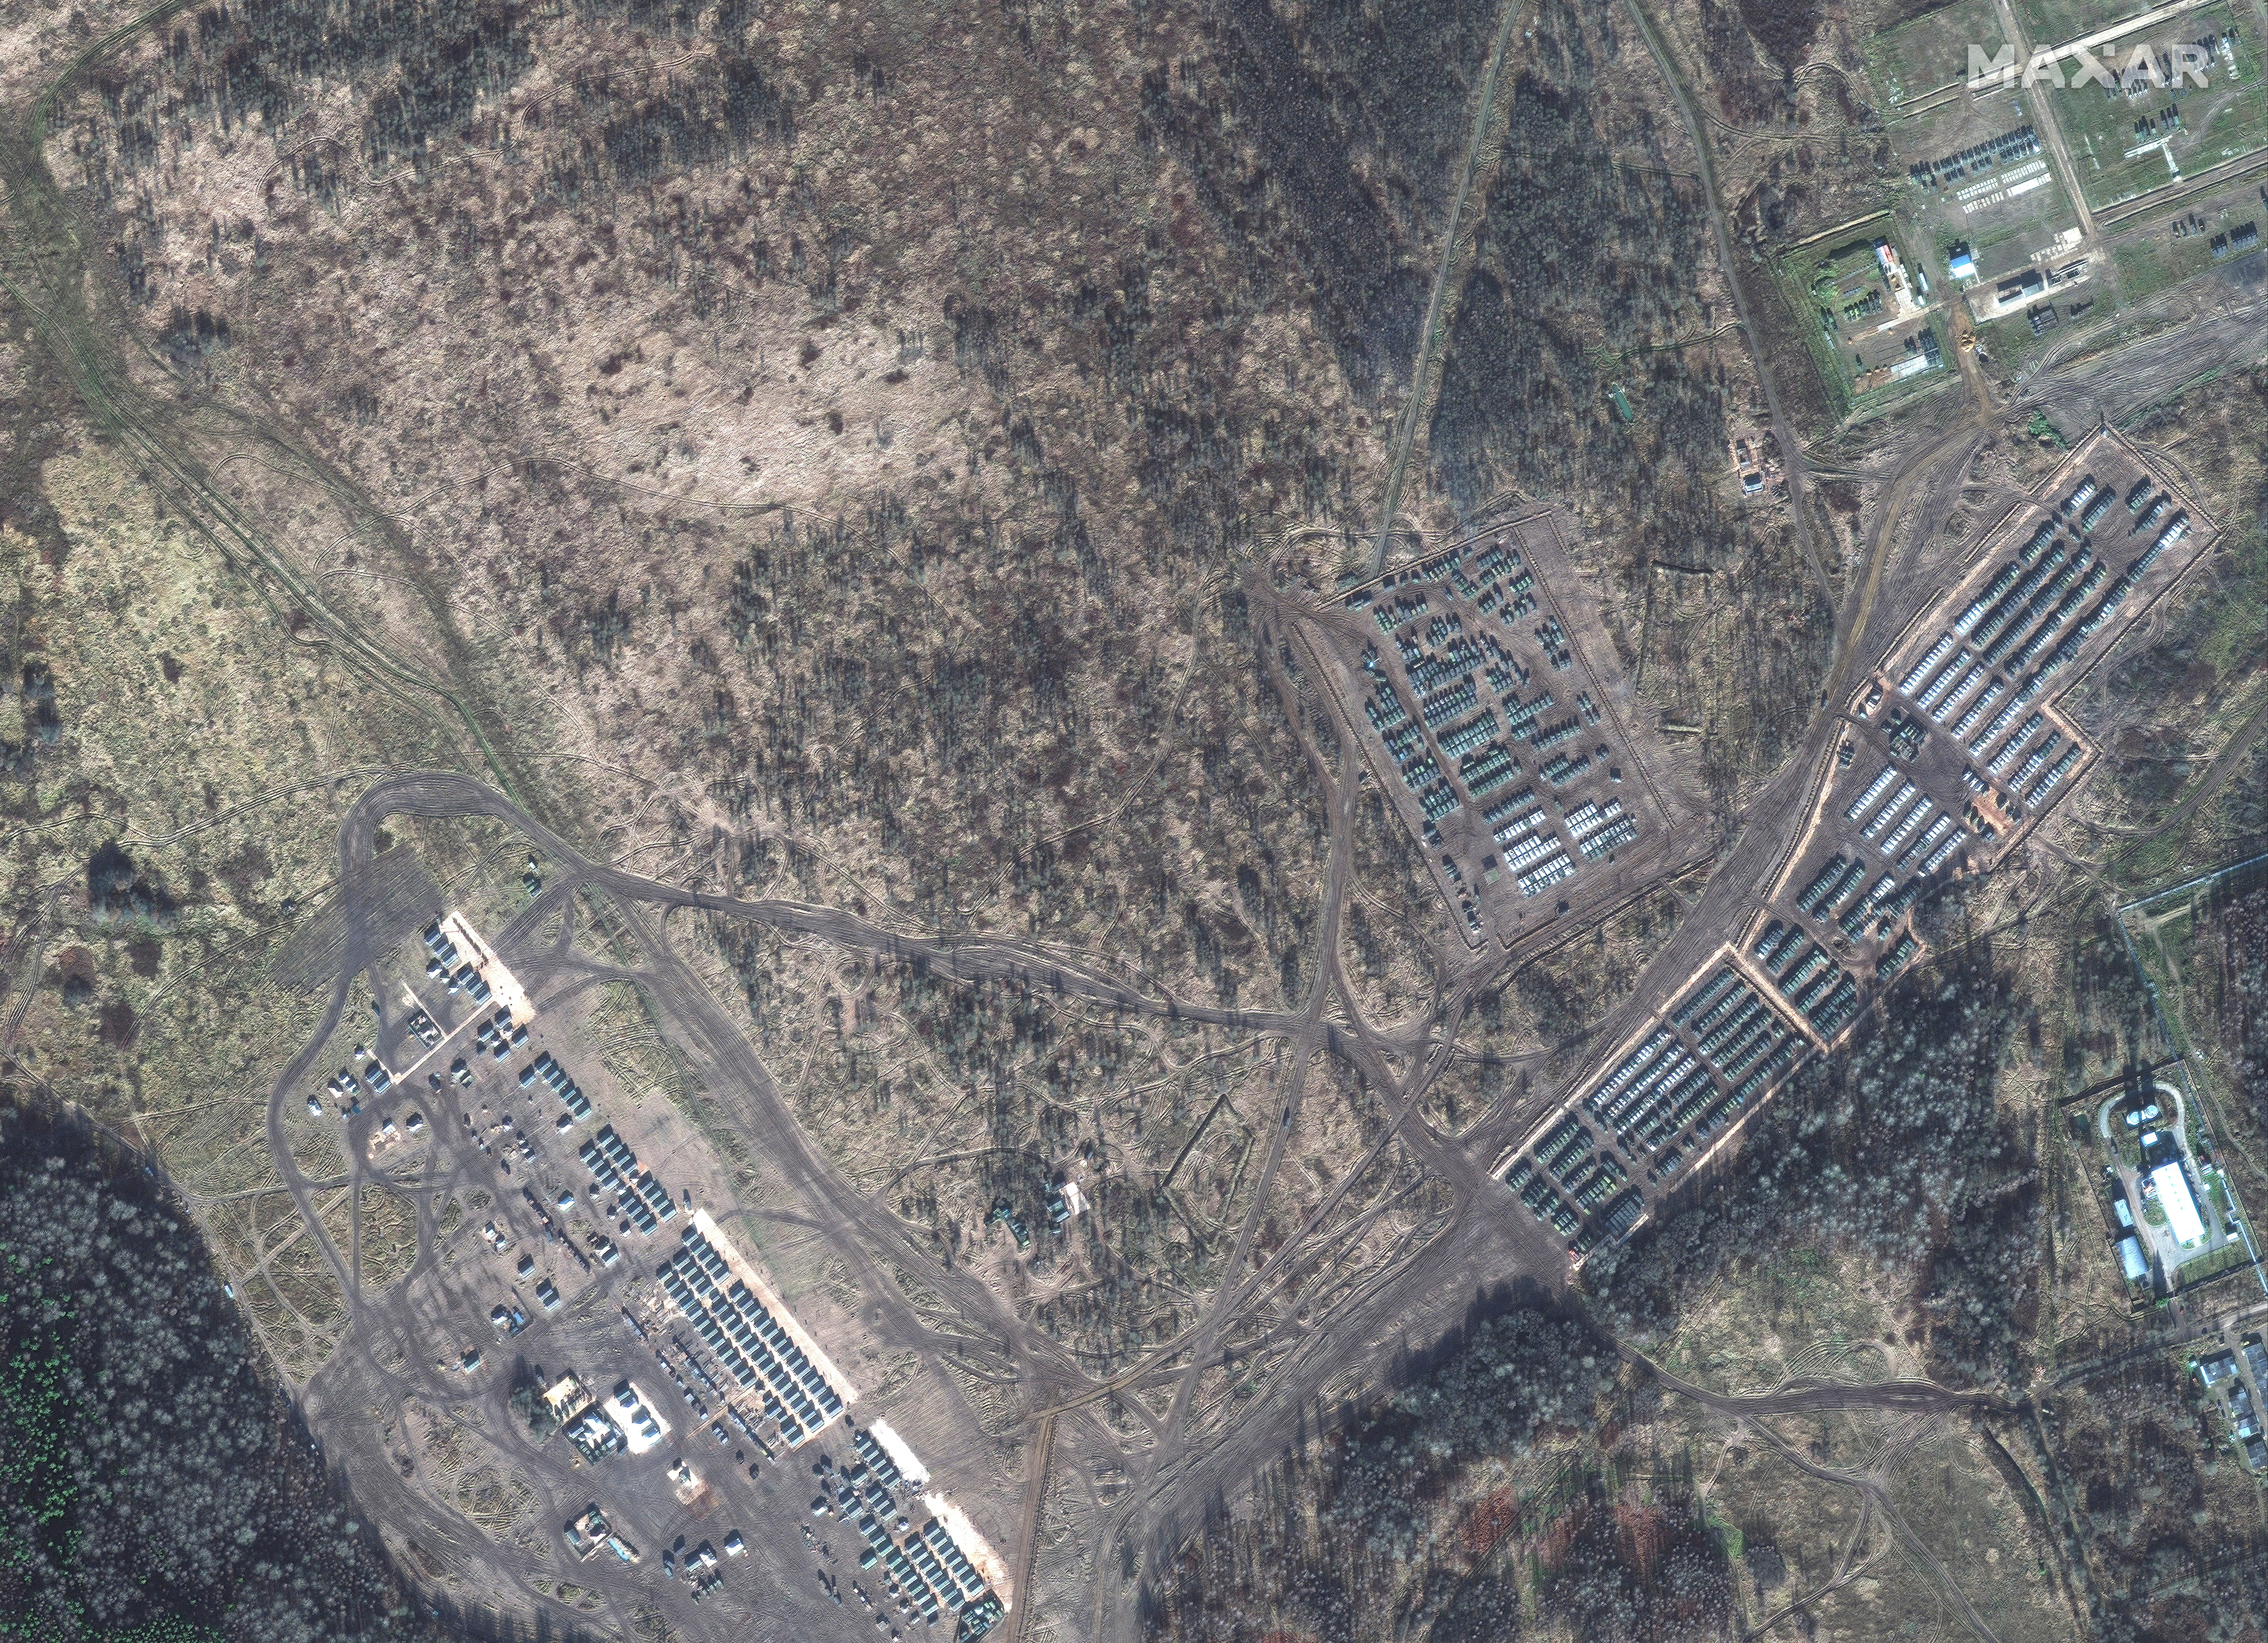 A satellite image shows elements of Russian 41st Combined Arms Army in Yelnya, Russia, November 1, 2021. Satellite Image ©2021 Maxar Technologies/Handout via REUTERS